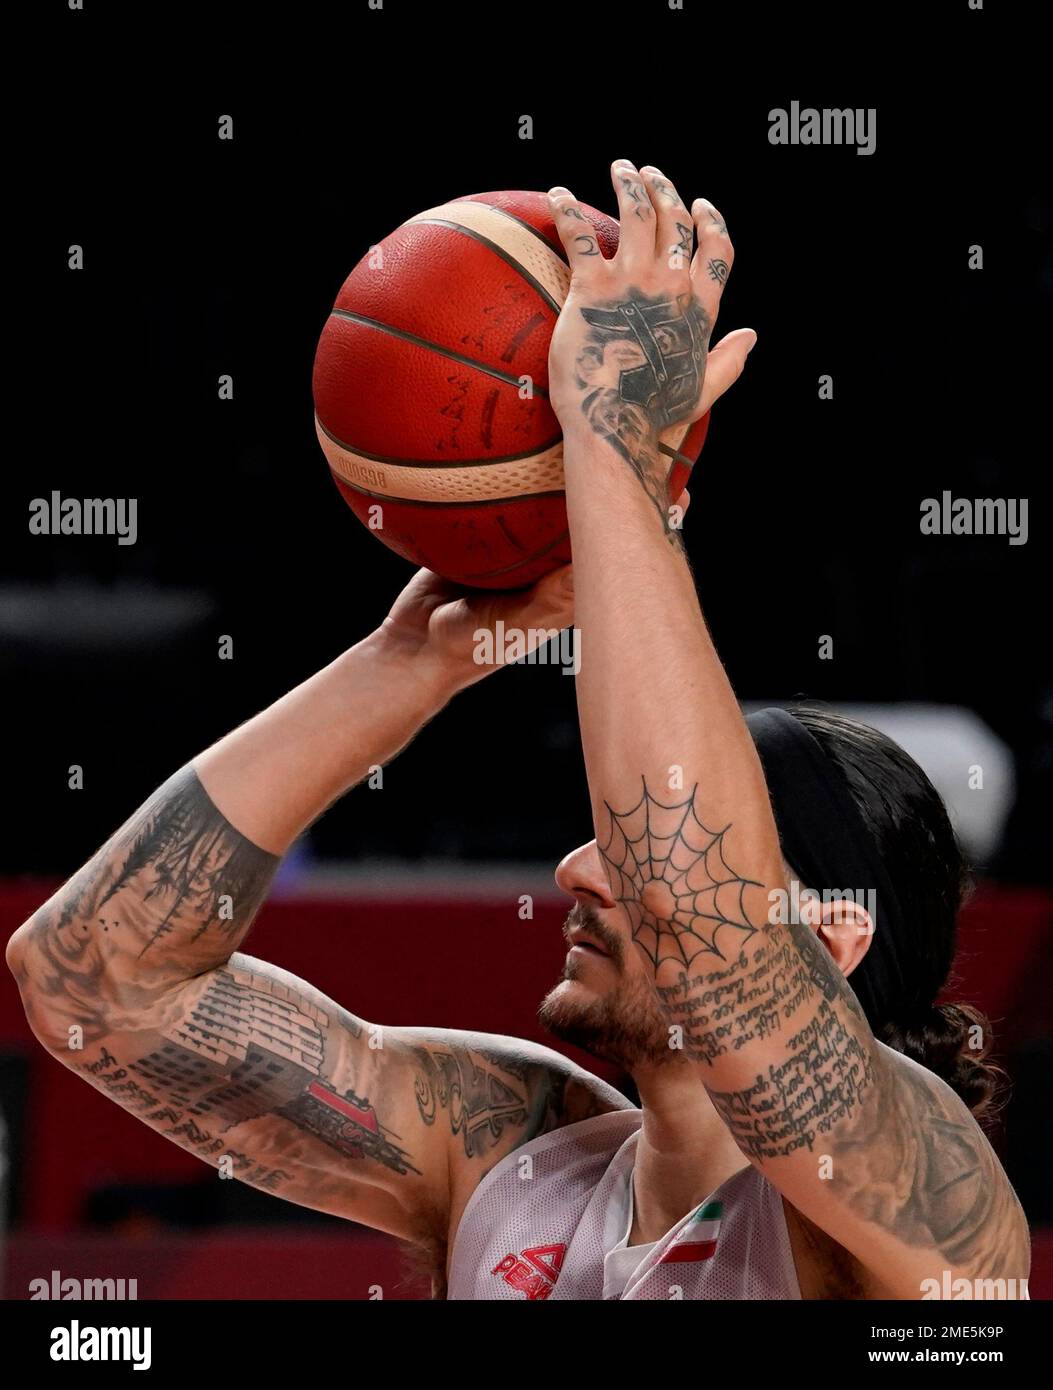 50 Amazing Basketball Tattoo Ideas and Designs with Meaning